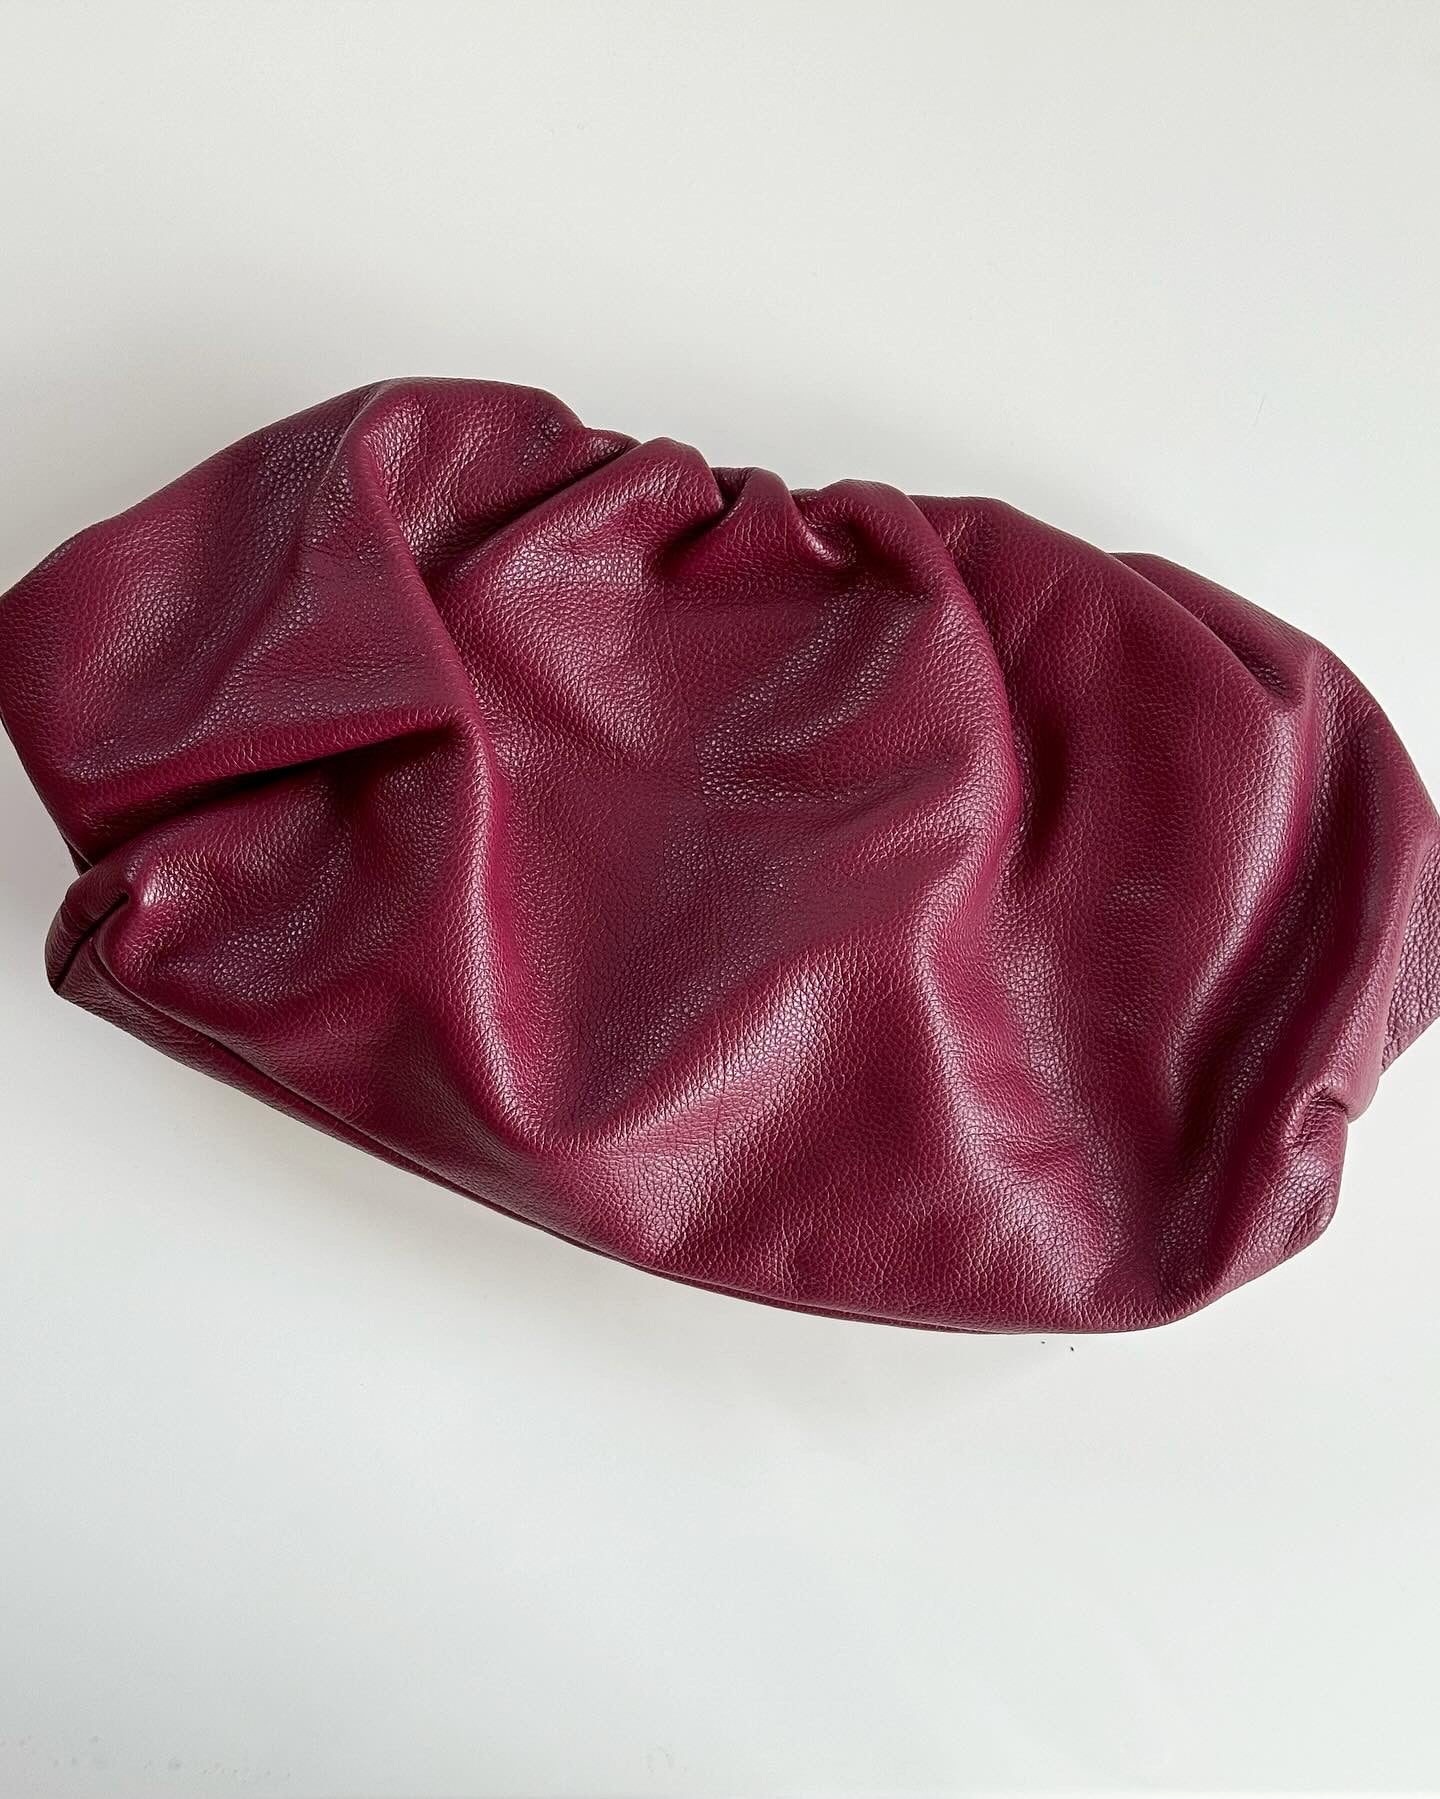 Amazing leather clutch bag in a burgundy color